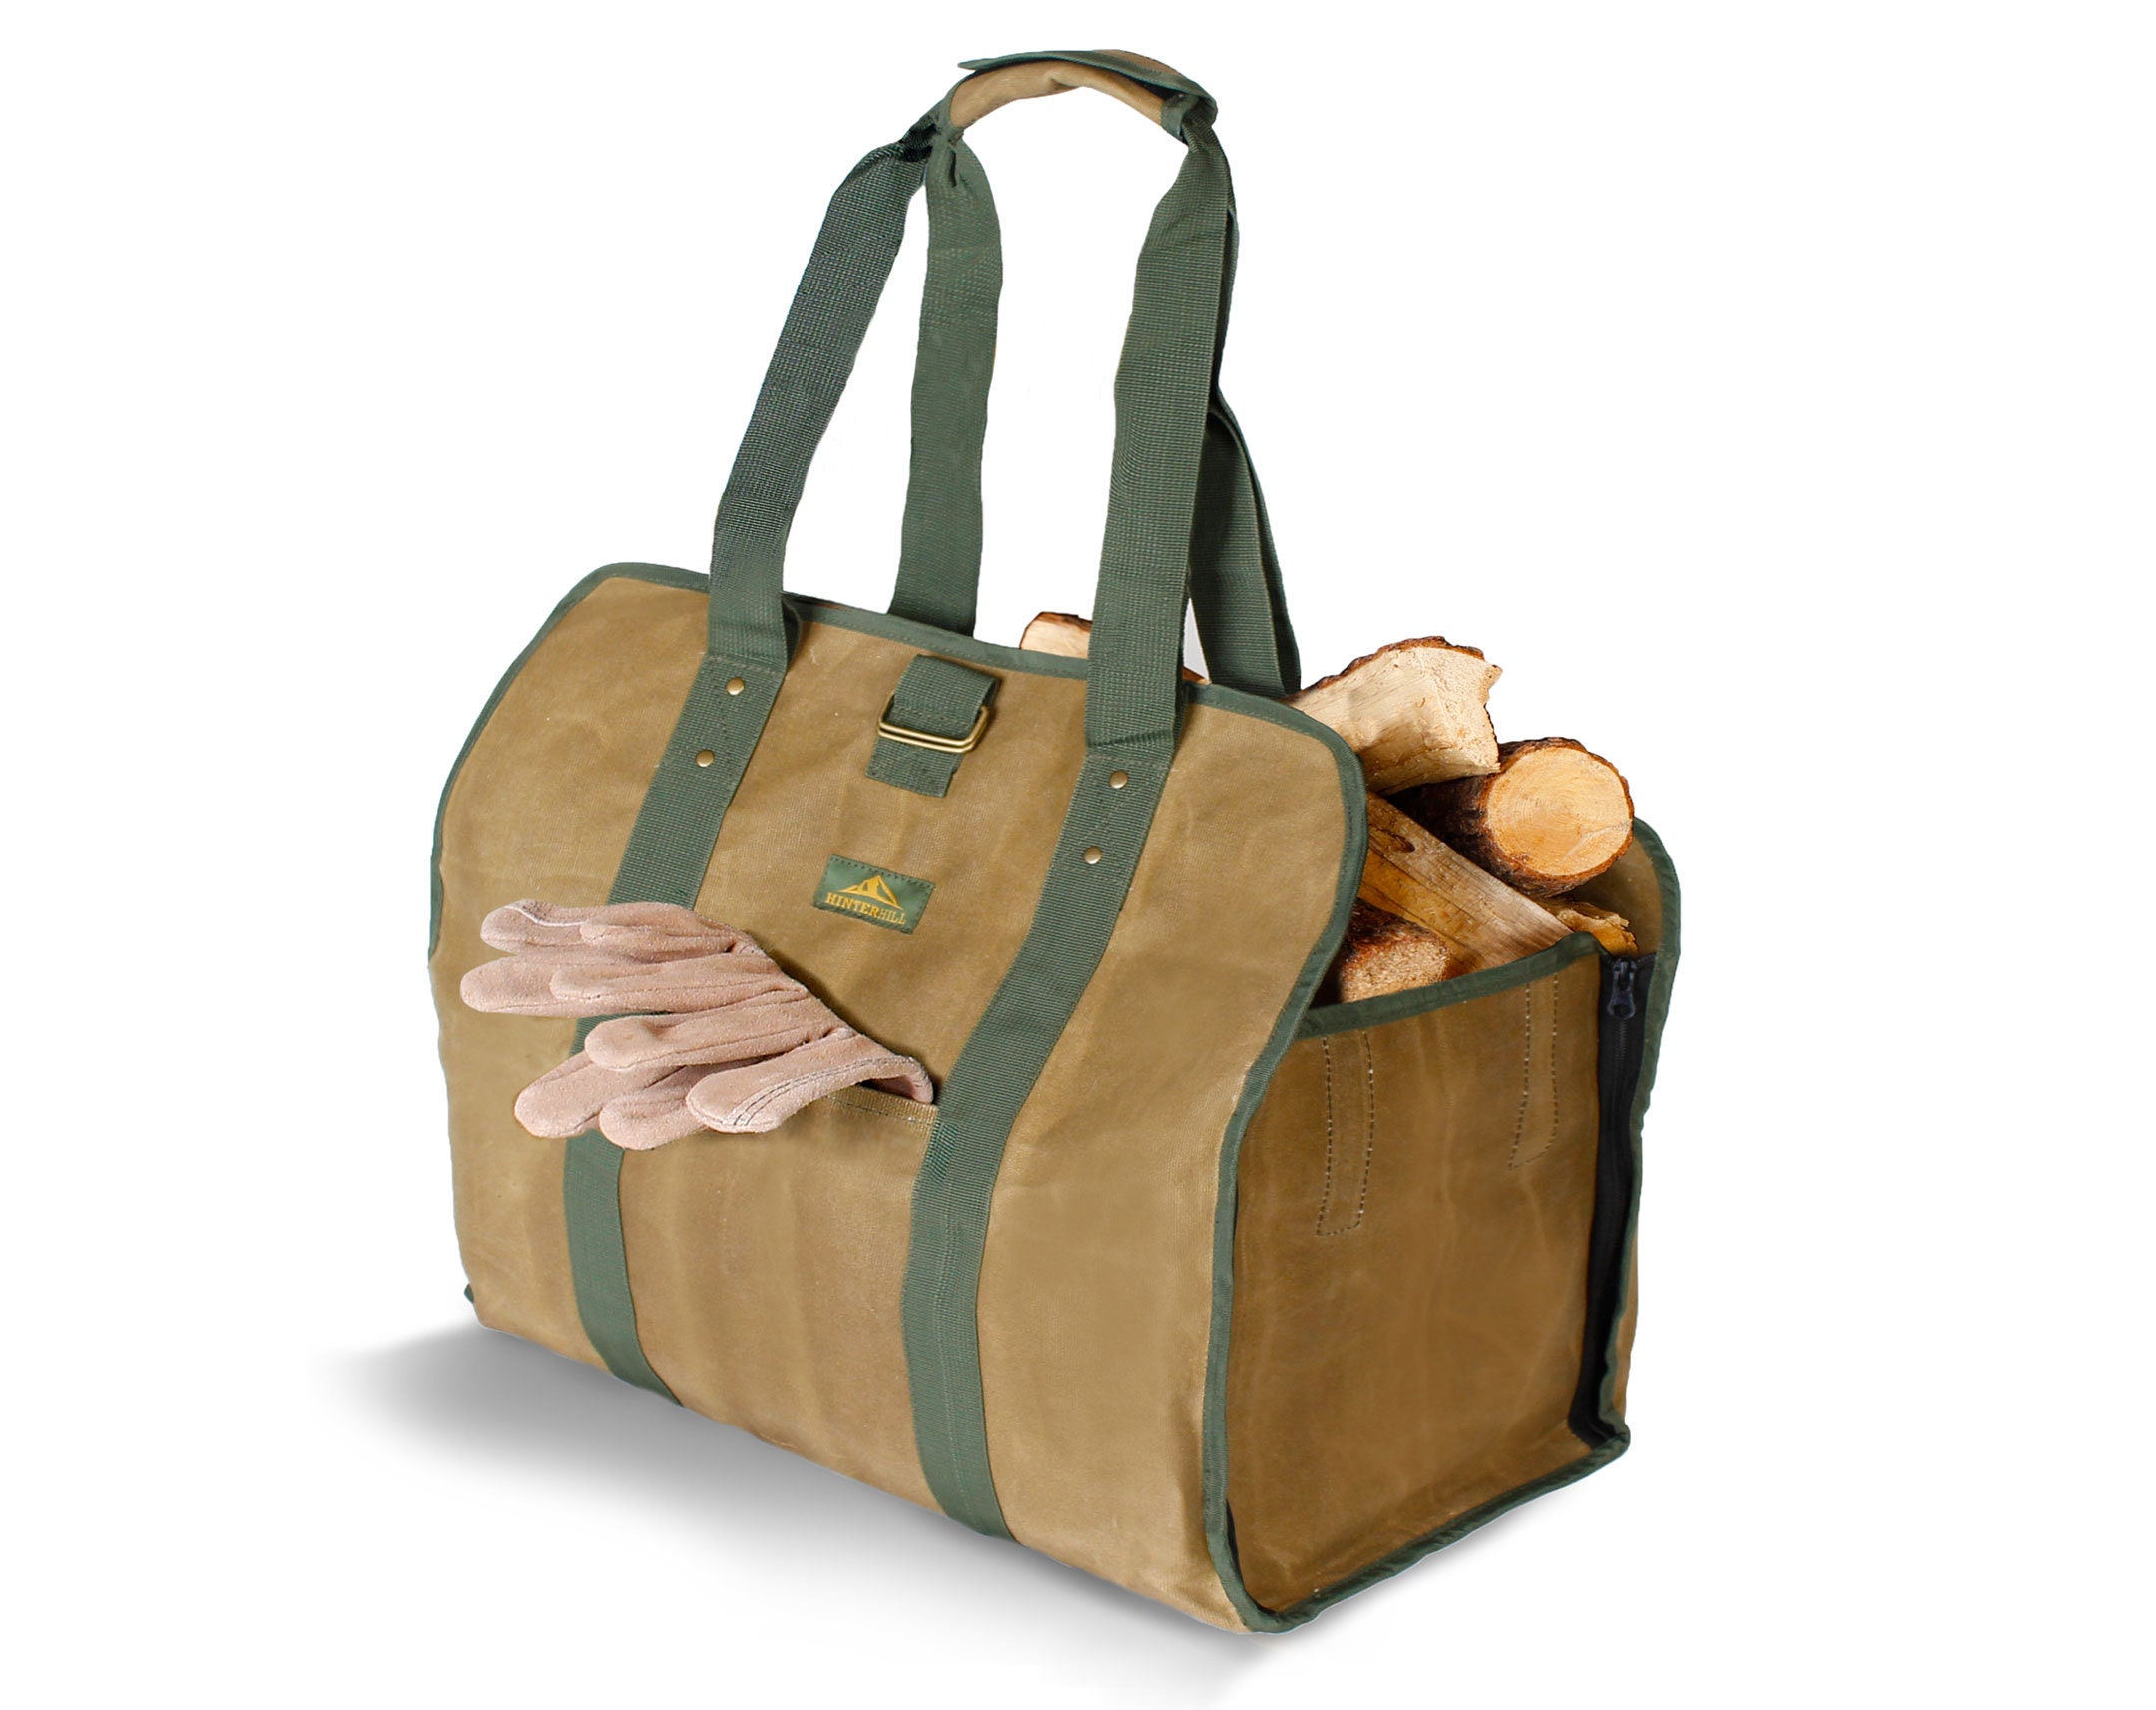 MLfire Canvas Firewood Log Carrier Bag, Canvas Firewood Tote Bag, Extra  Large Firewood Holder, Wood Carrying Bag with Shoulder Strap and Top  Handles for Camping 